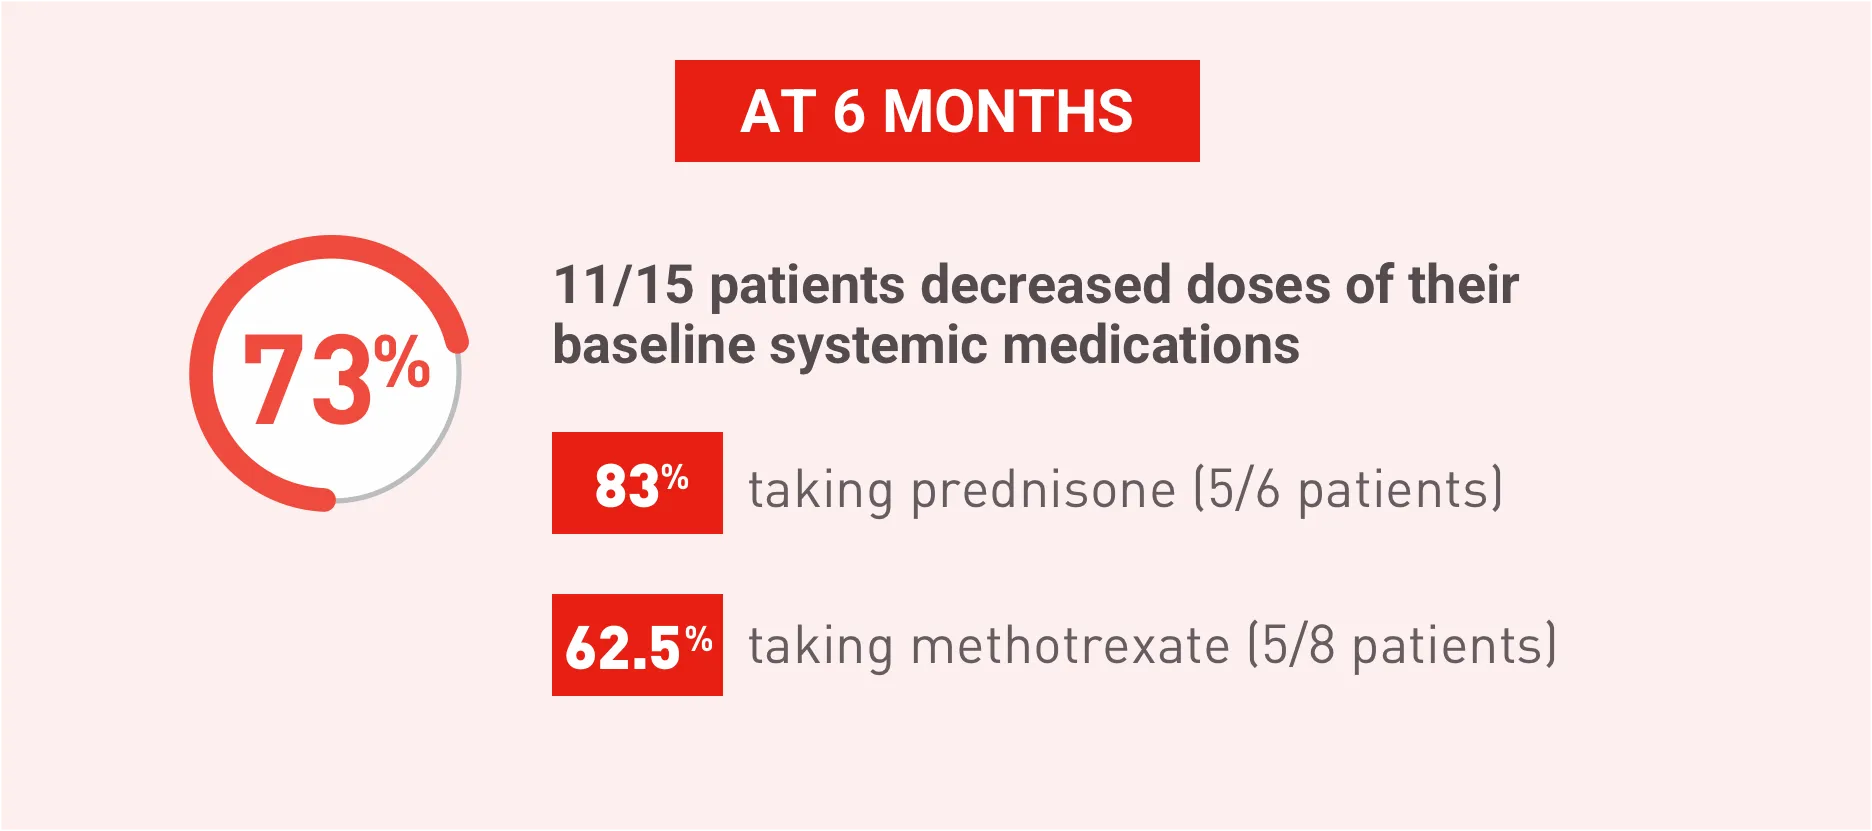 Acthar Gel case study: Decreased doses of baseline systemic medications at 6 months